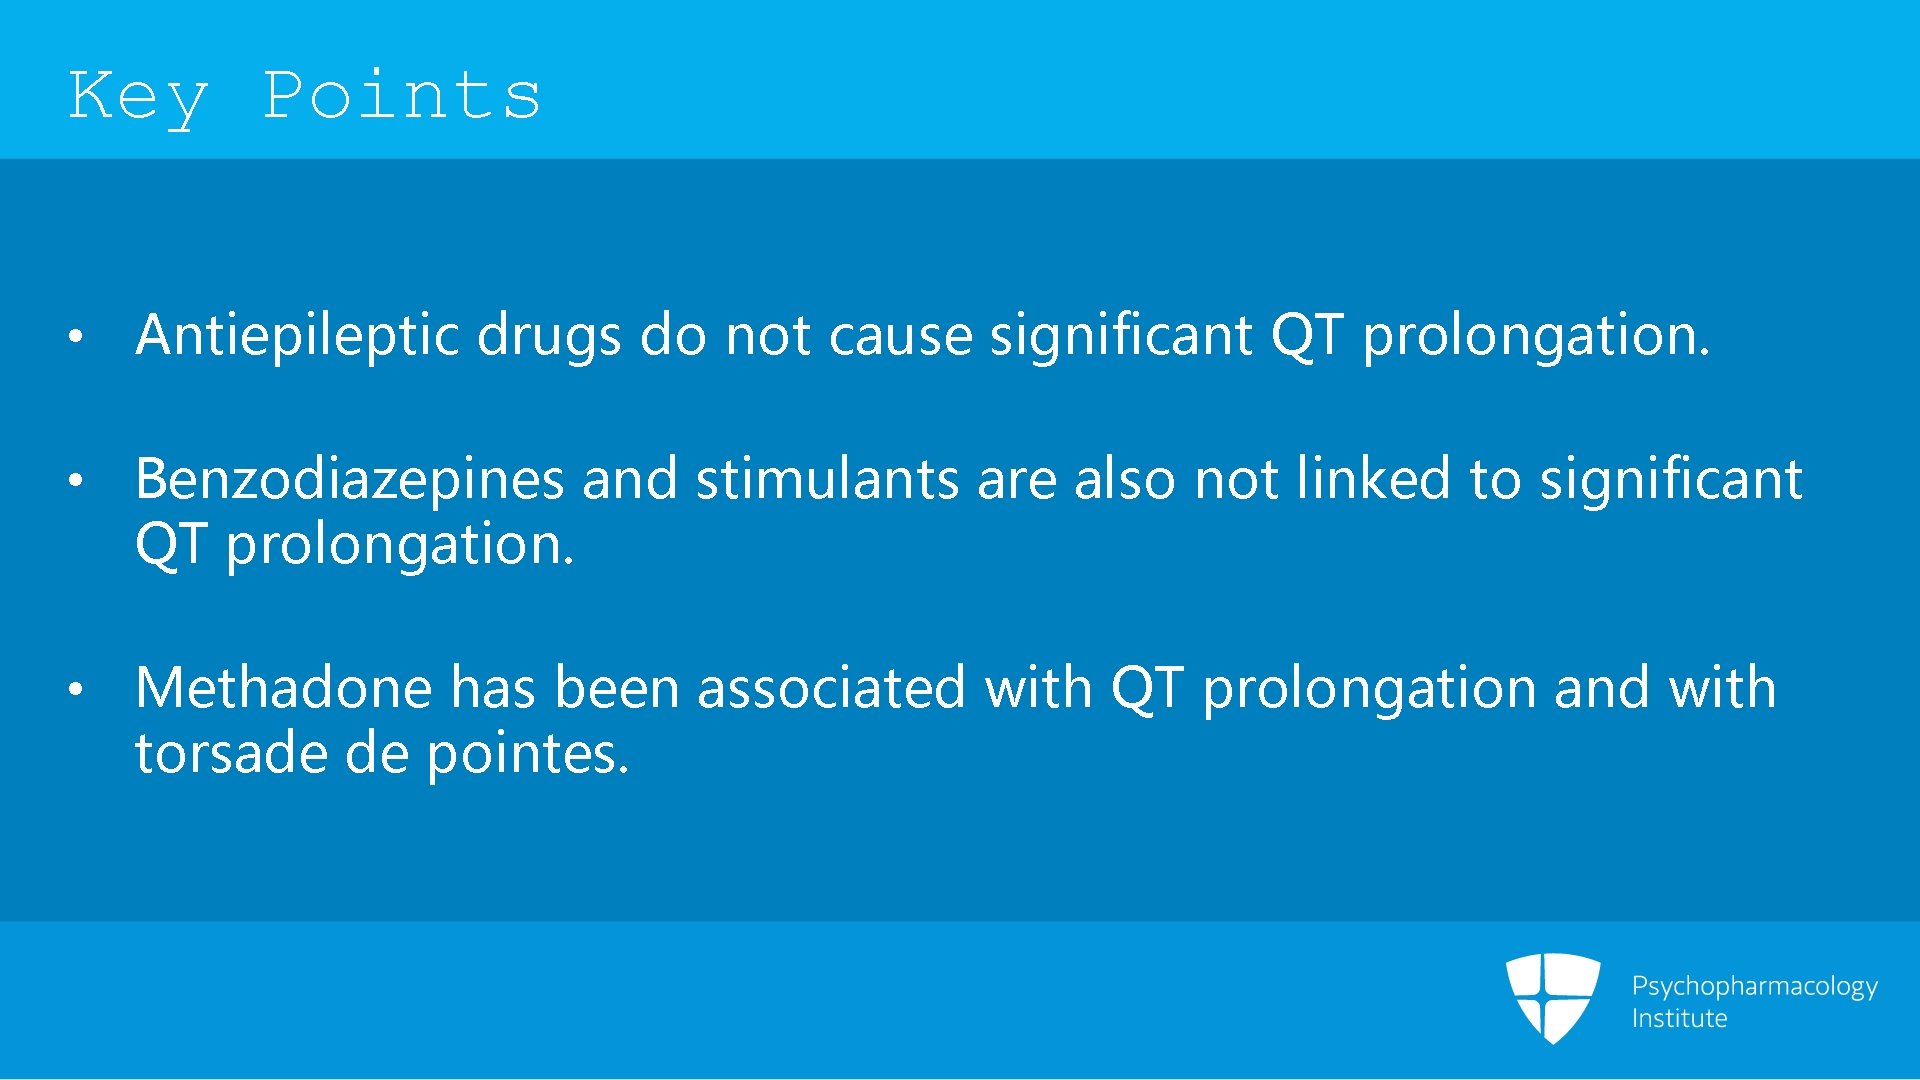 Key Points • Antiepileptic drugs do not cause significant QT prolongation. • Benzodiazepines and